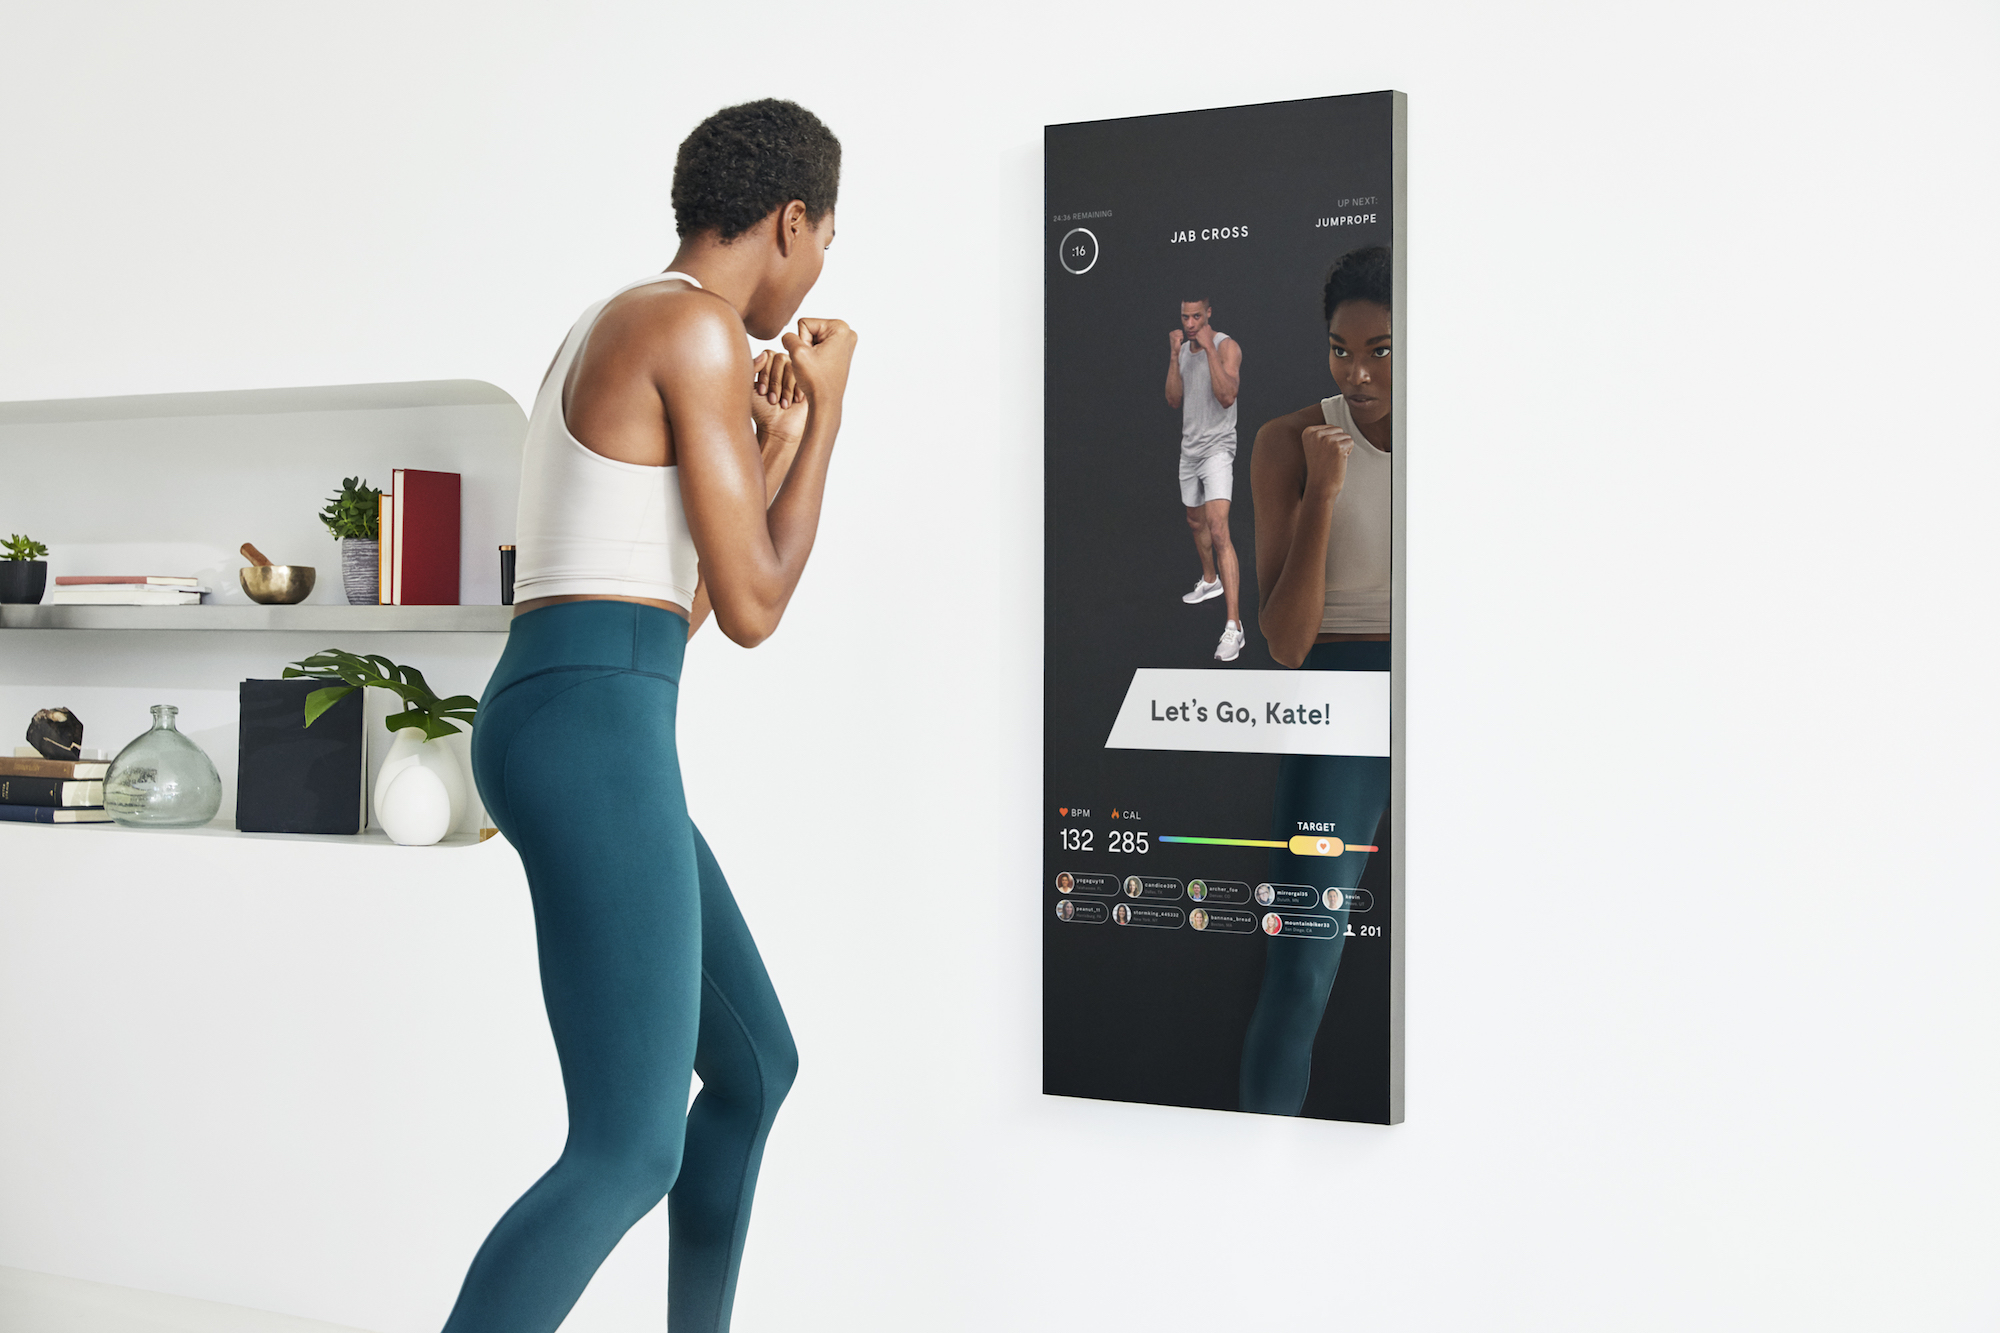 A $1,500 smart mirror brings live fitness classes to your home | Engadget